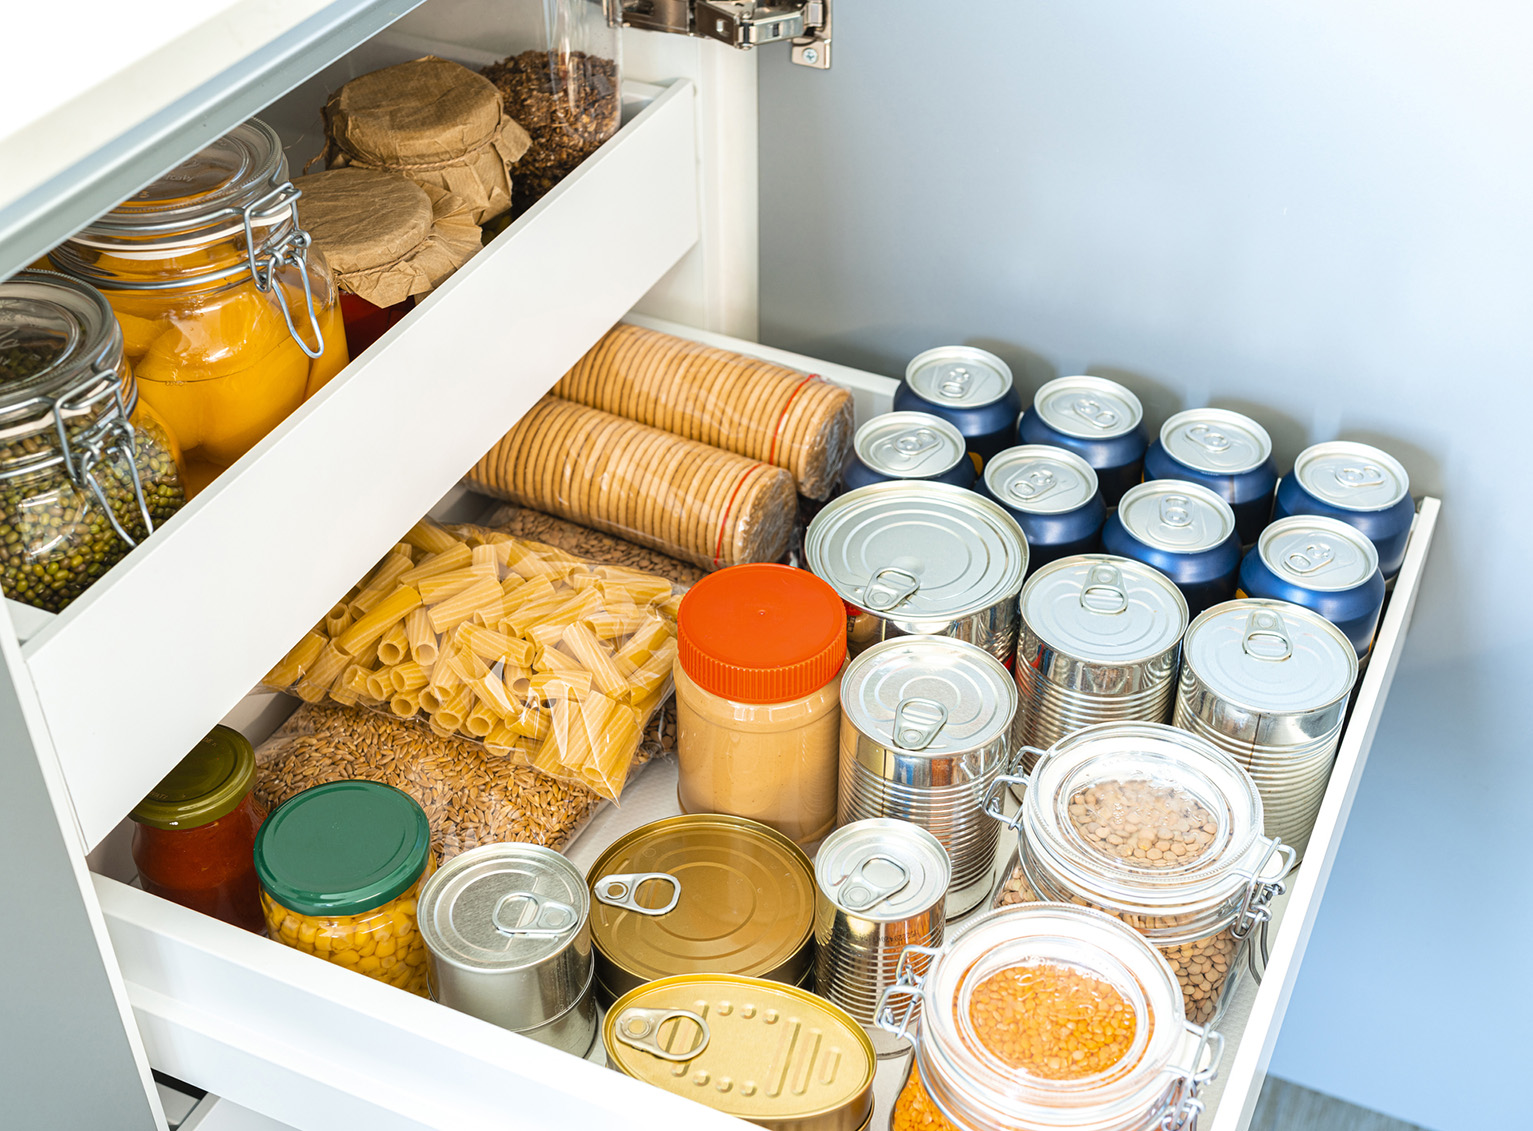 Pull out pantry drawers are an organized, presentable way to store